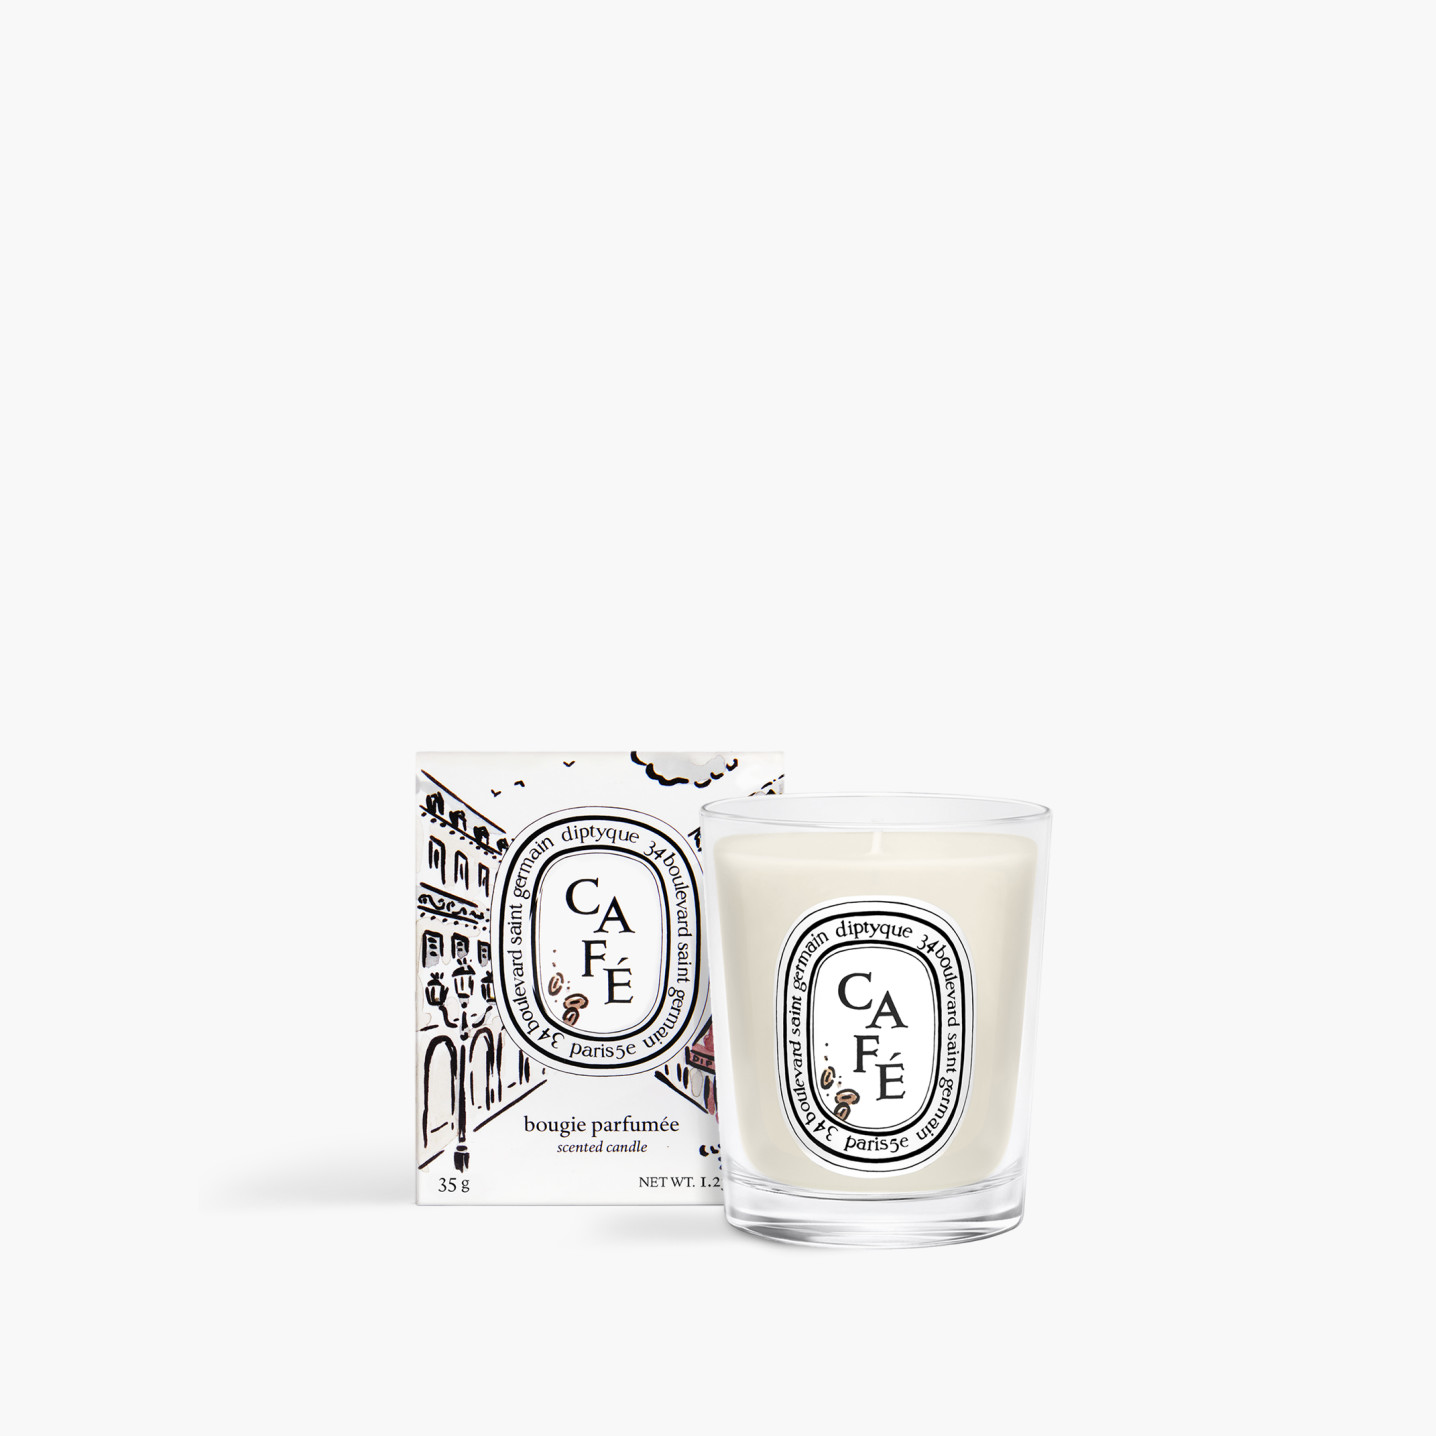 YOUR DIPTYQUE EXCLUSIVE OFFER​